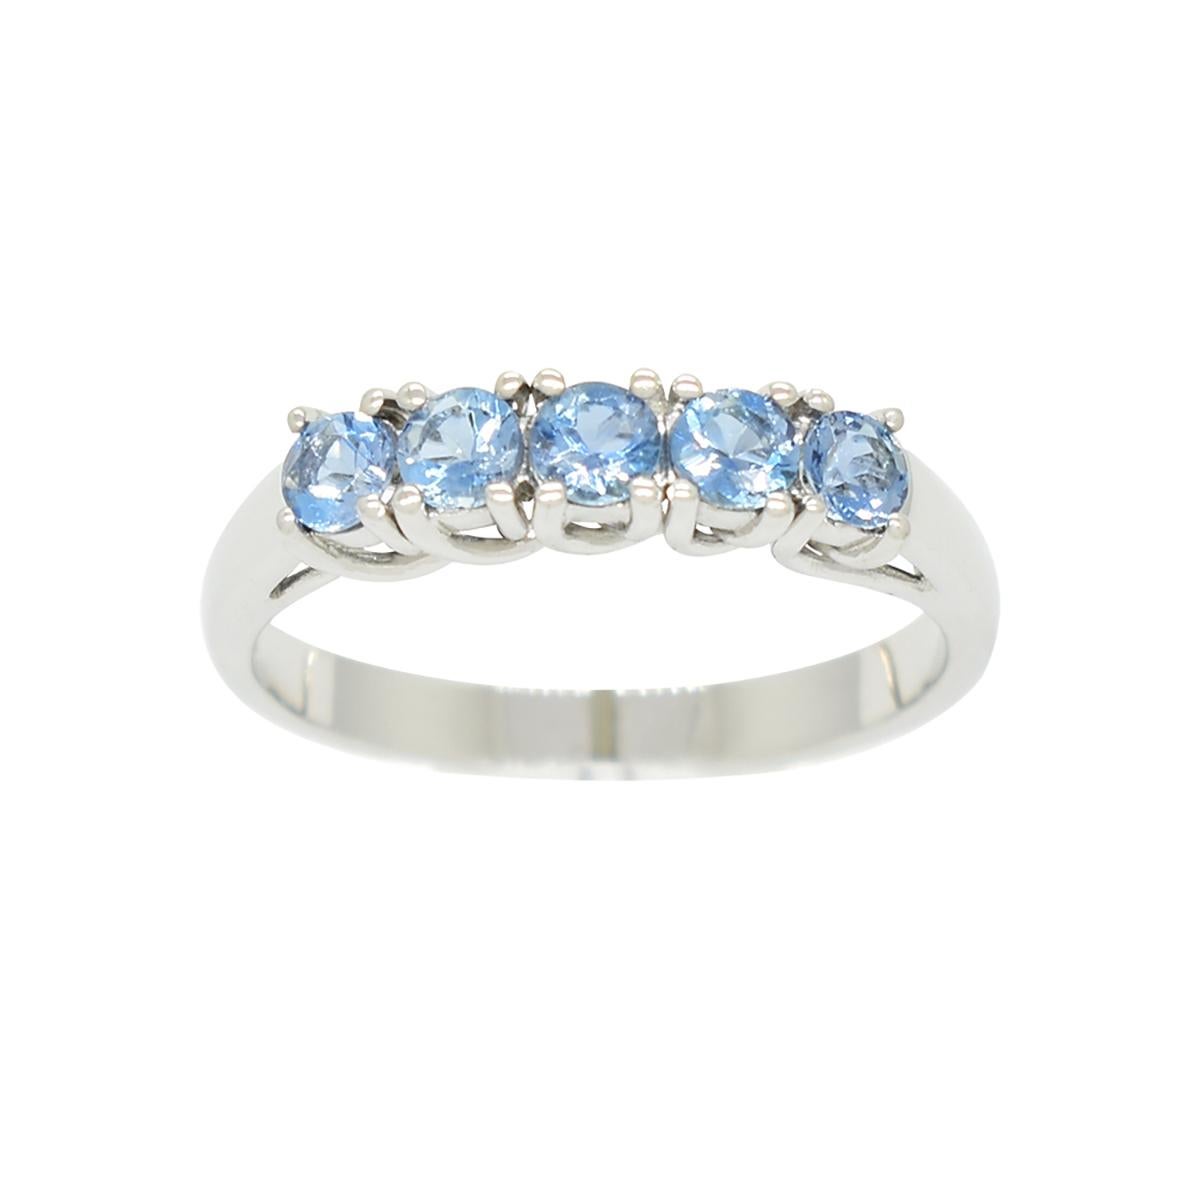 Small Wedding Band Ring With Round Cut Aquamarines in 18K White Gold In New Condition For Sale In Bradenton, FL